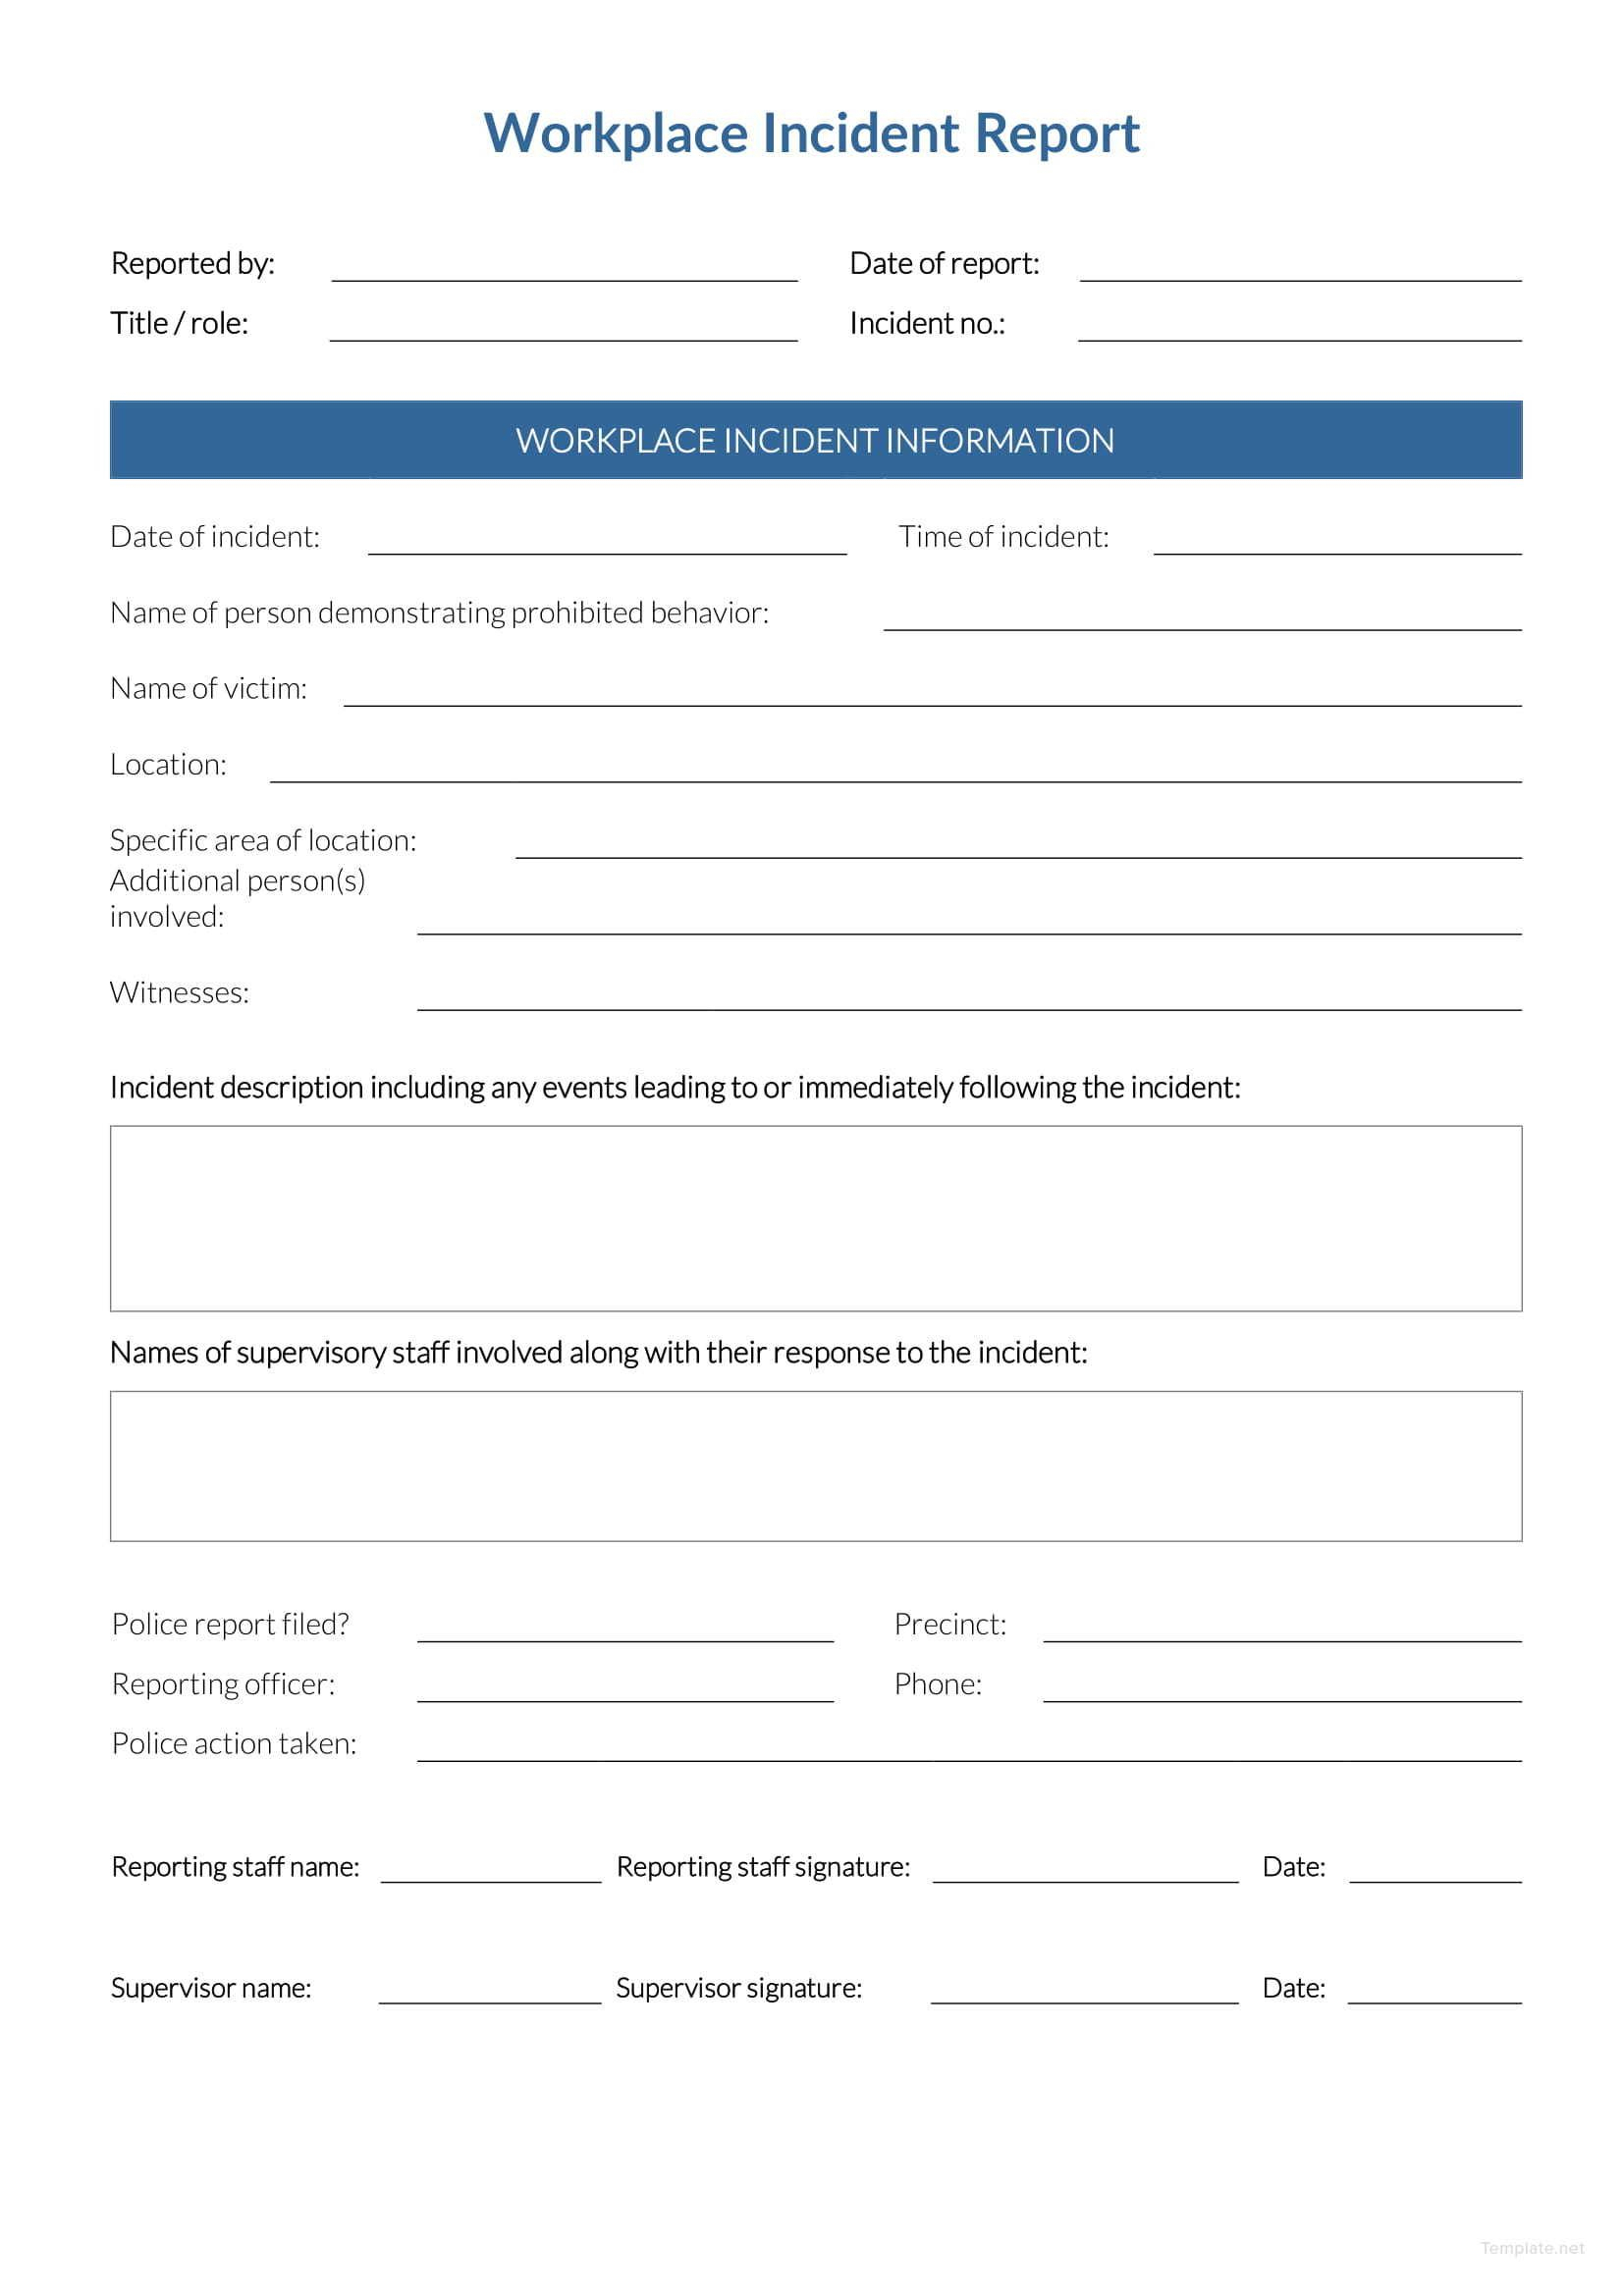 Free Workplace Incident Report | Data Form | Incident Report Within Generic Incident Report Template